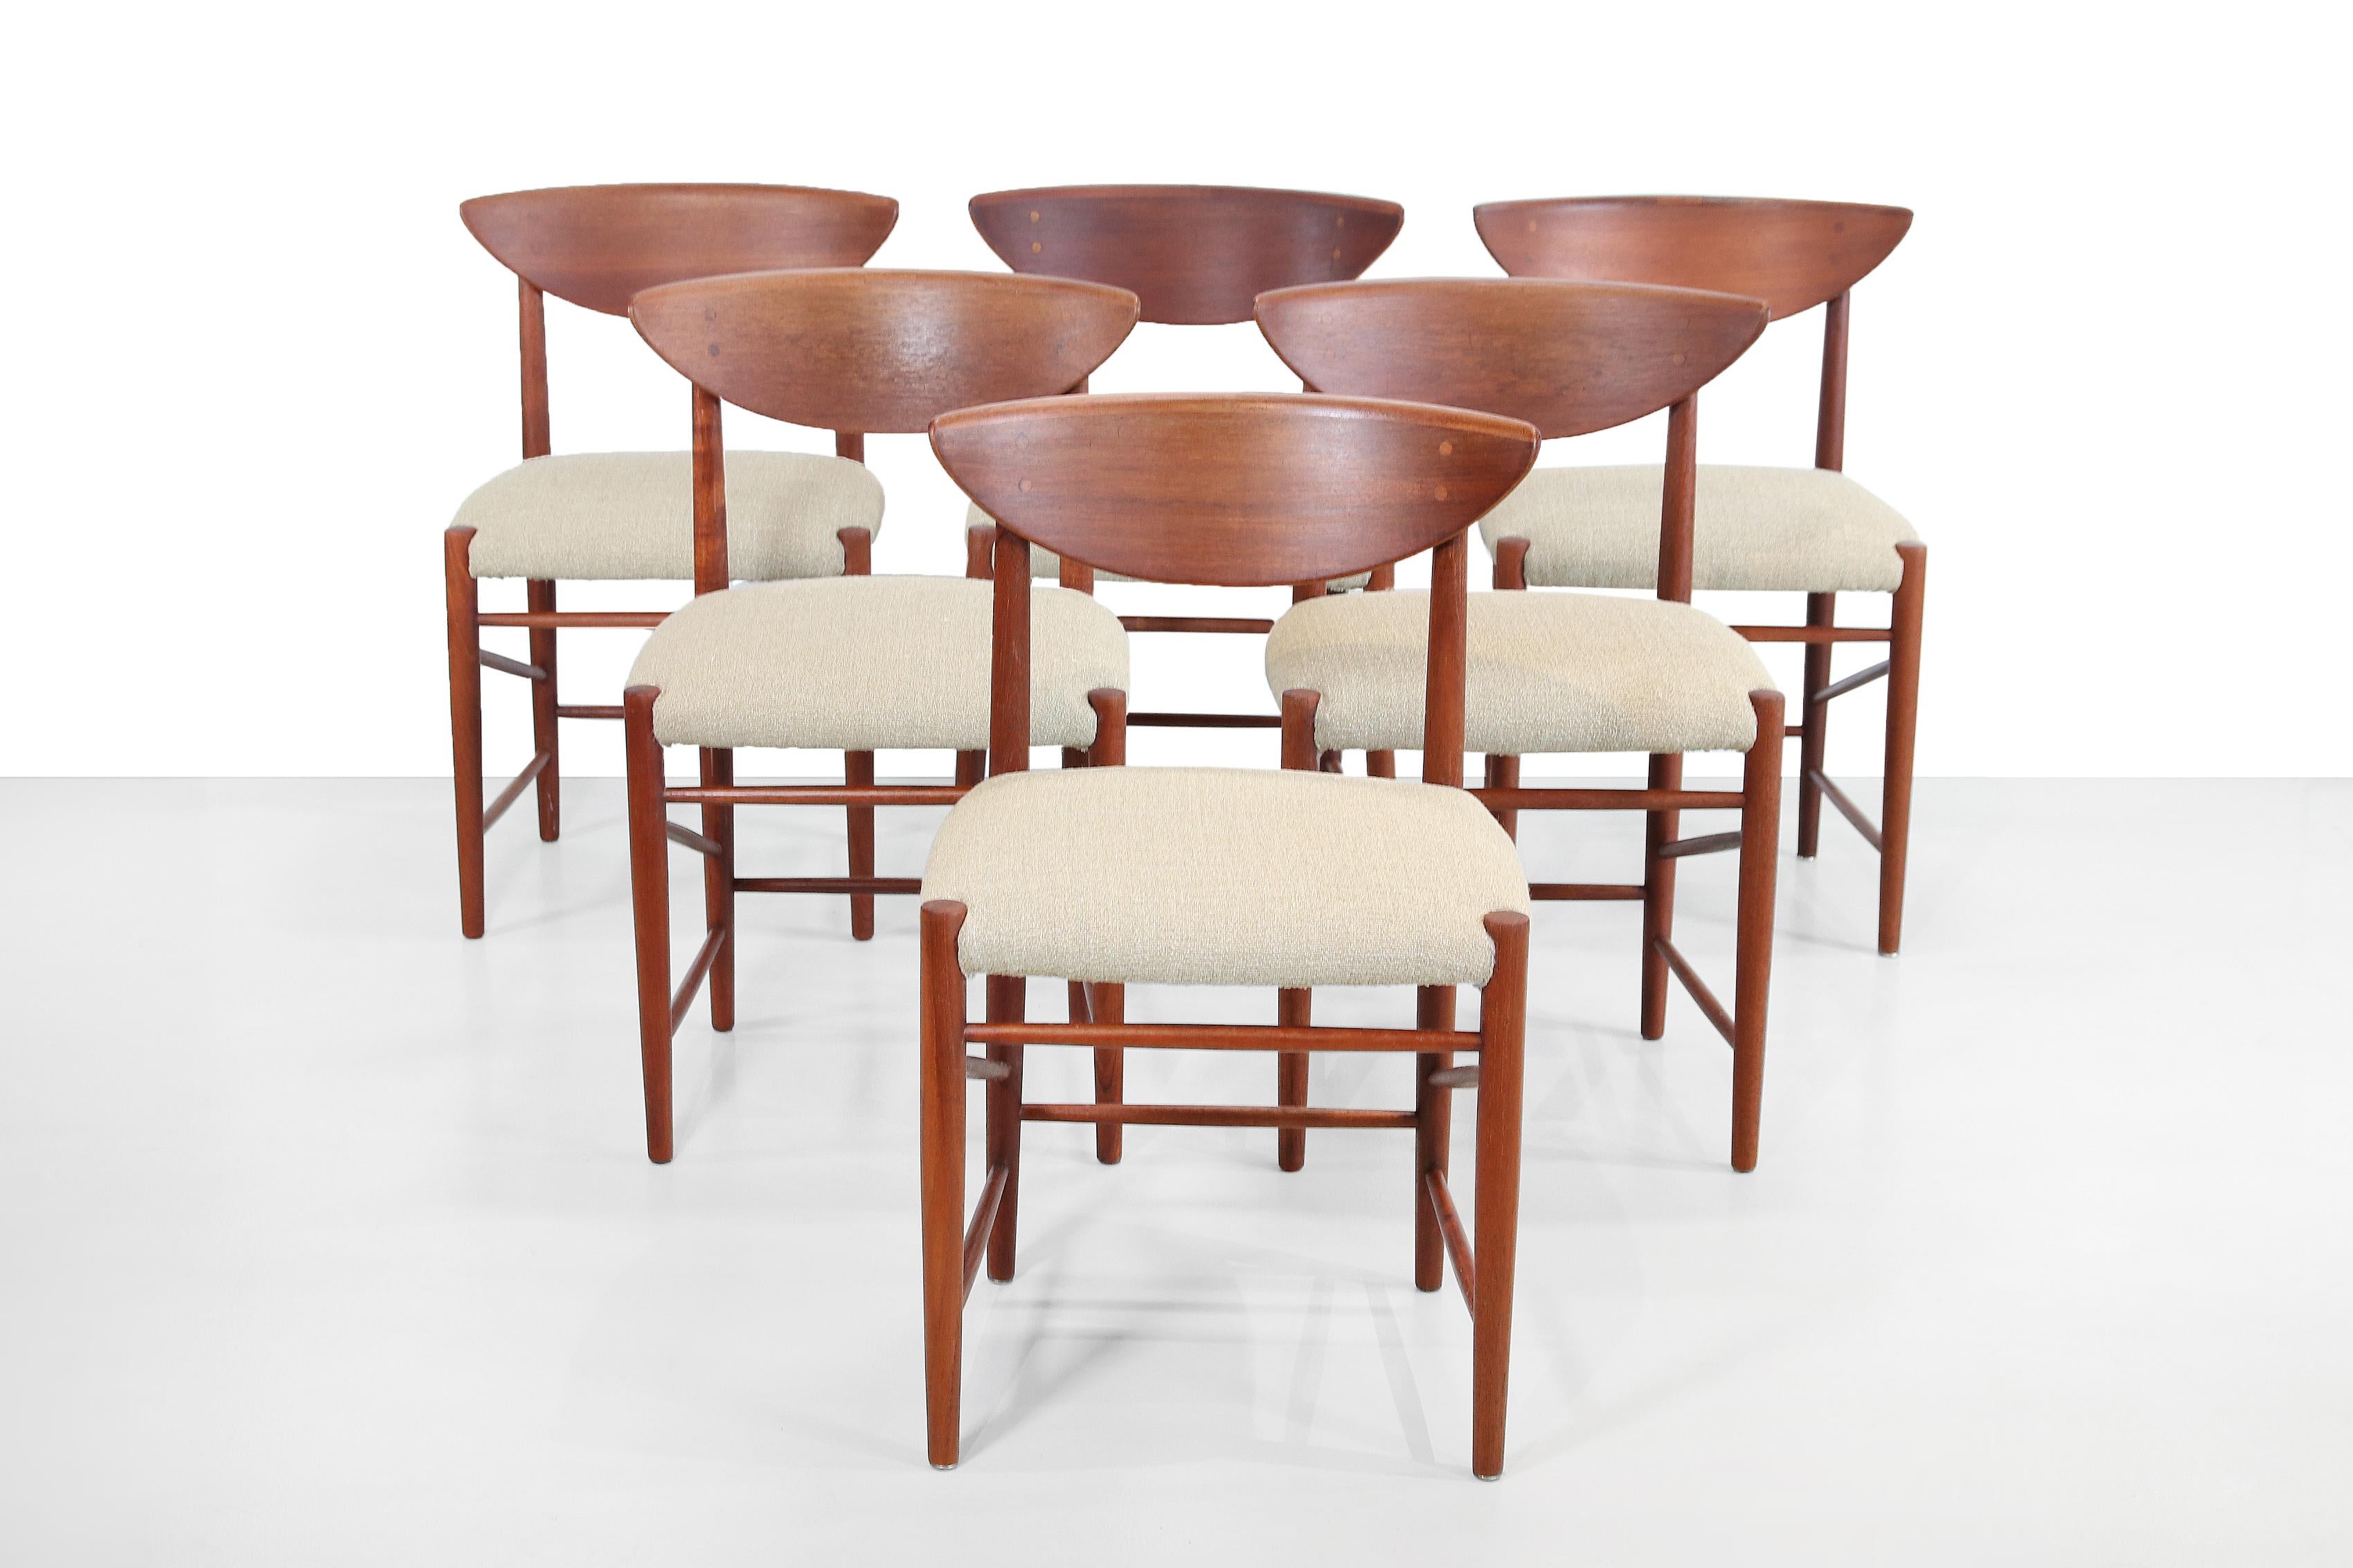 Set of 6 teak model 316 chairs designed by Peter Hvidt and Orla Molgaard Nielsen in 1955. 
The seats have been upholstered in a natural high quality furniture fabric.
The chairs are 76 cm high, 48 cm wide and 45 cm deep.

Designer: Peter Hvidt and